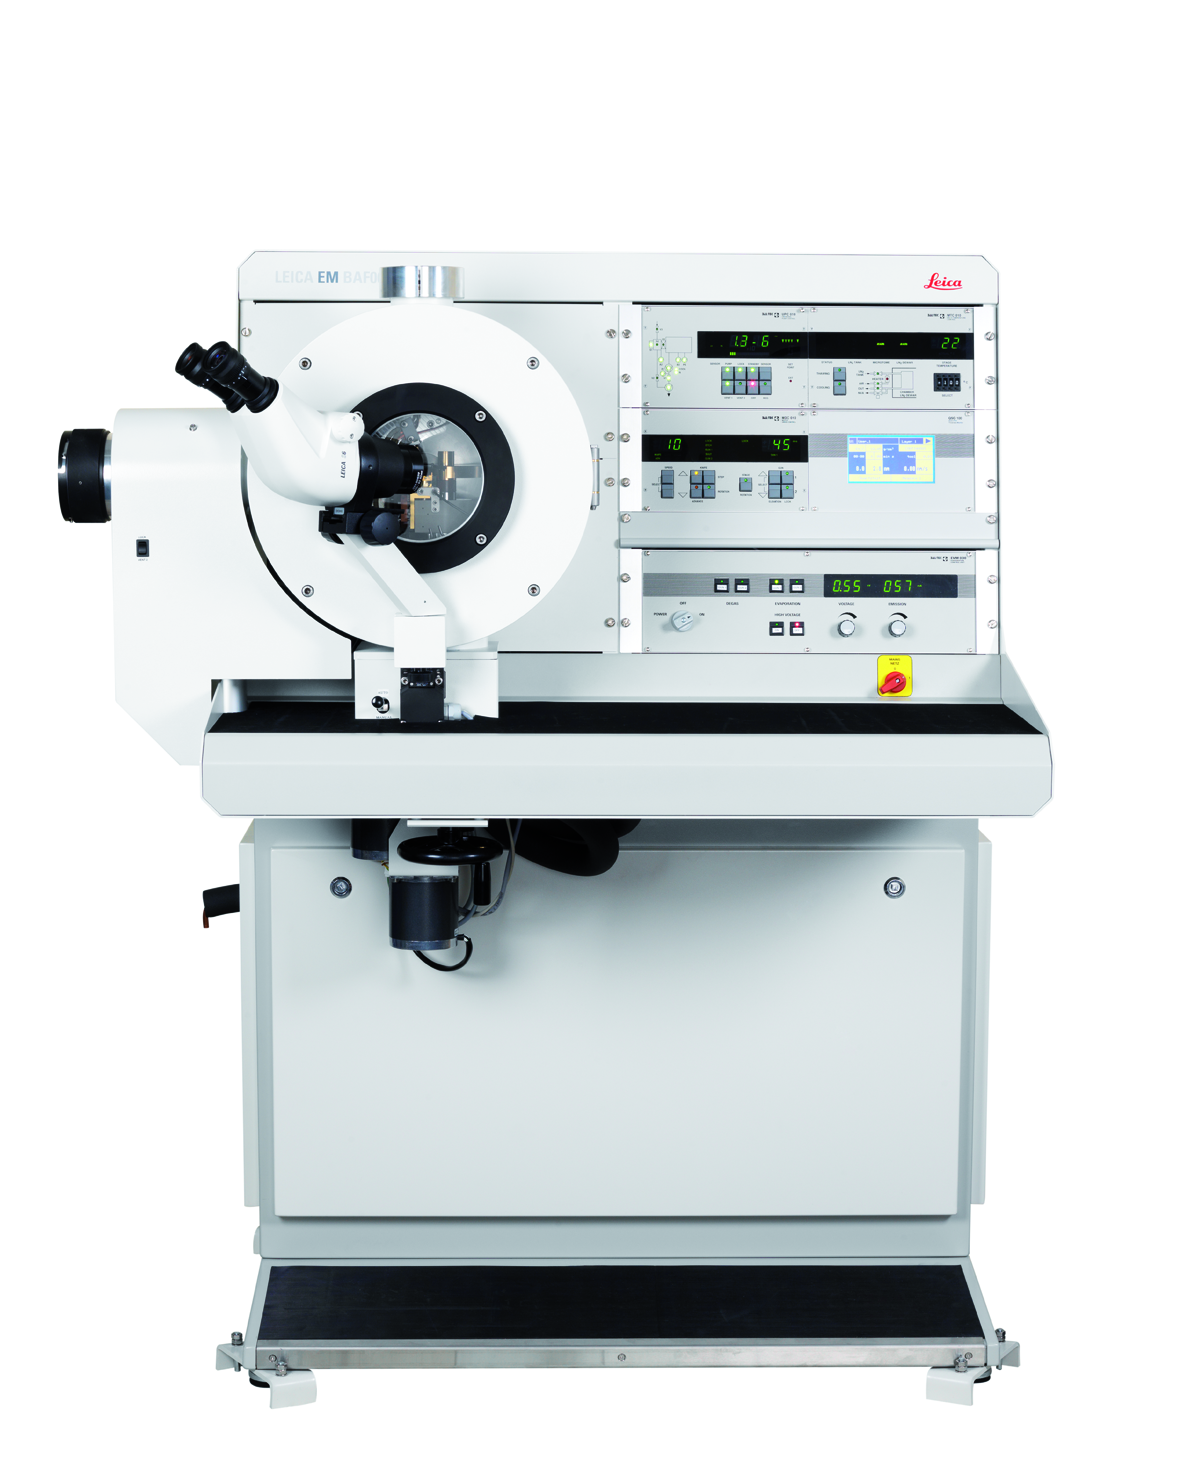 The Leica BAF060 Freeze fracture system